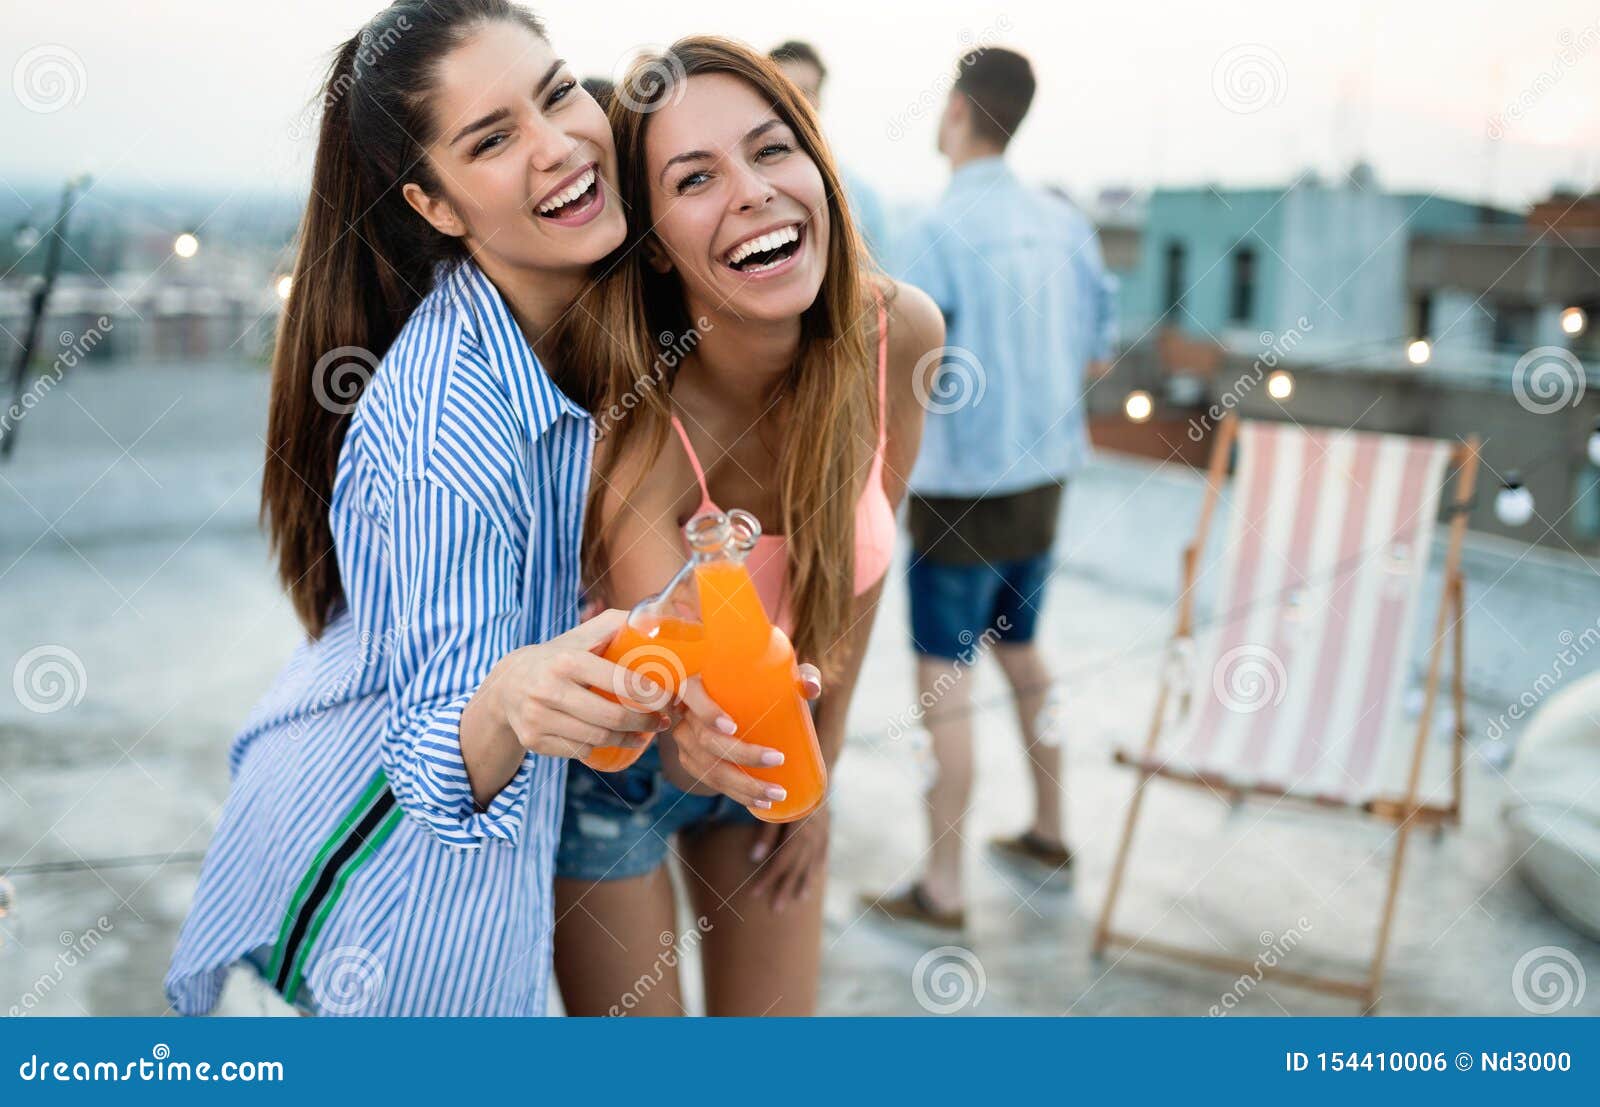 Happy Young Girls Having Fun at Party Stock Photo - Image of male ...